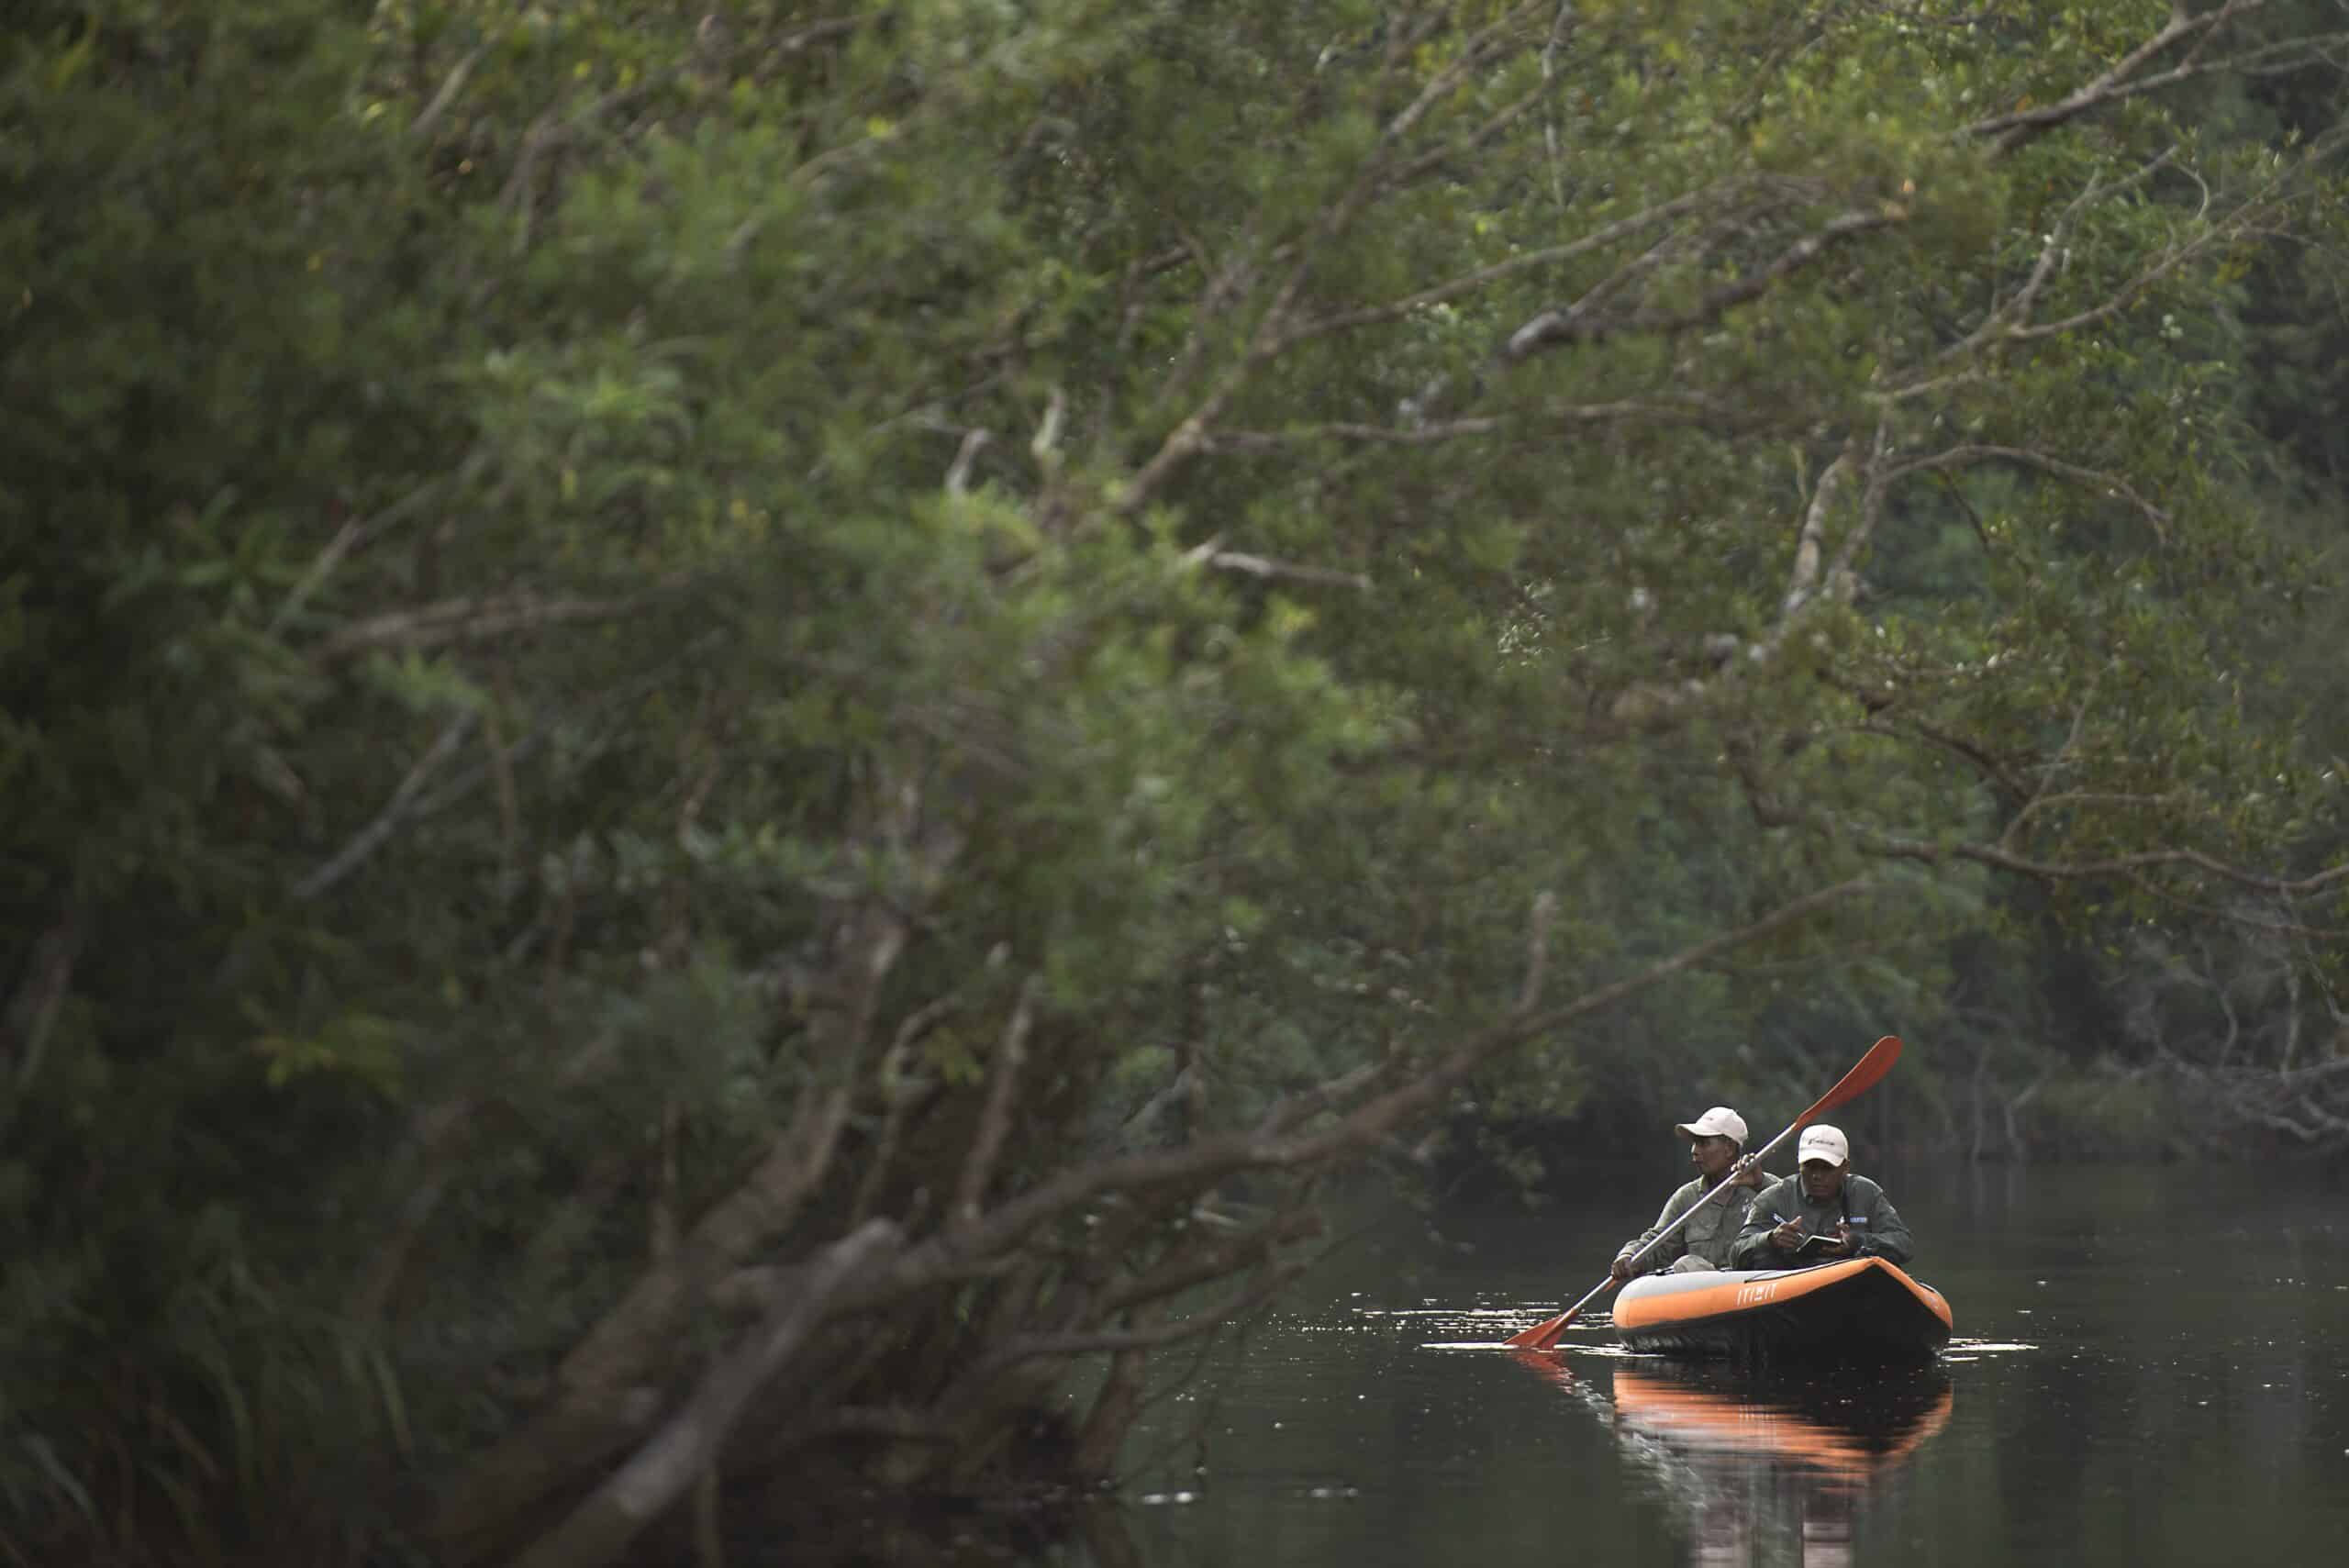 A boat survey along the river at Chhay Reap in March 2022 (photograph by Jeremy Holden for Flora and Fauna International).